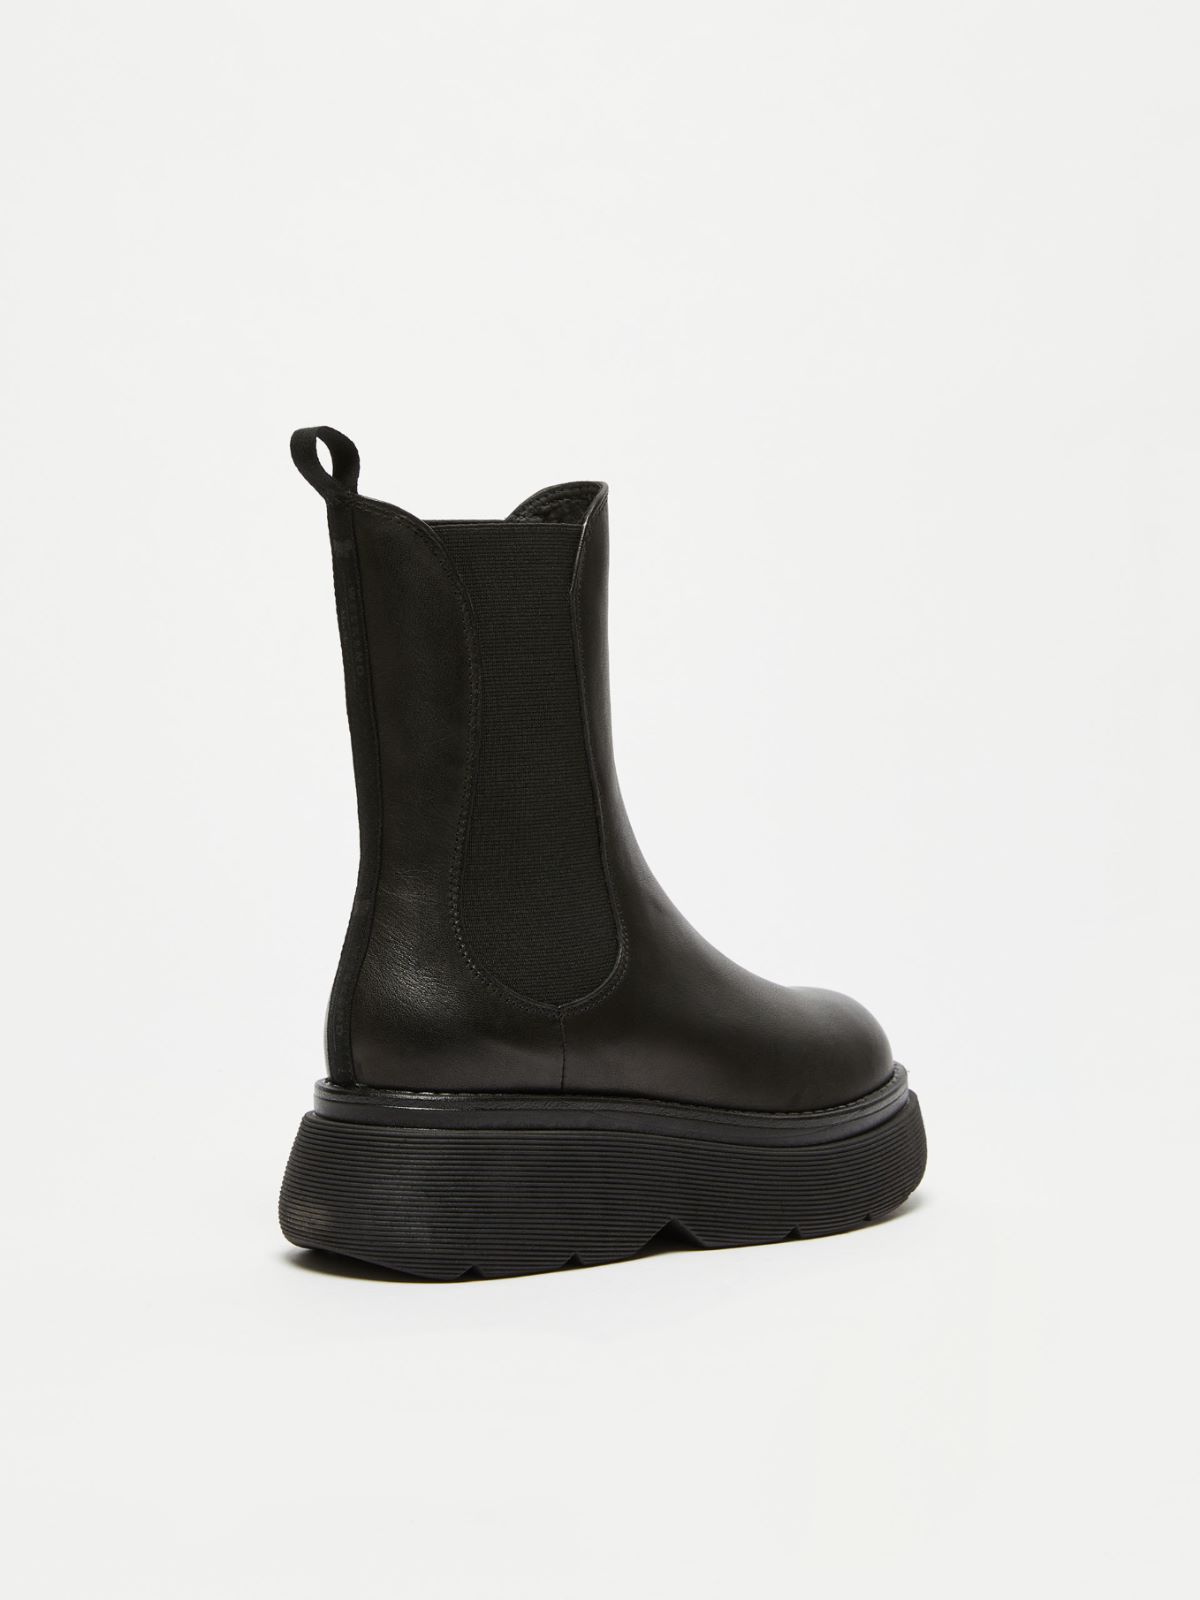 Leather ankle boots, black | Weekend Max Mara